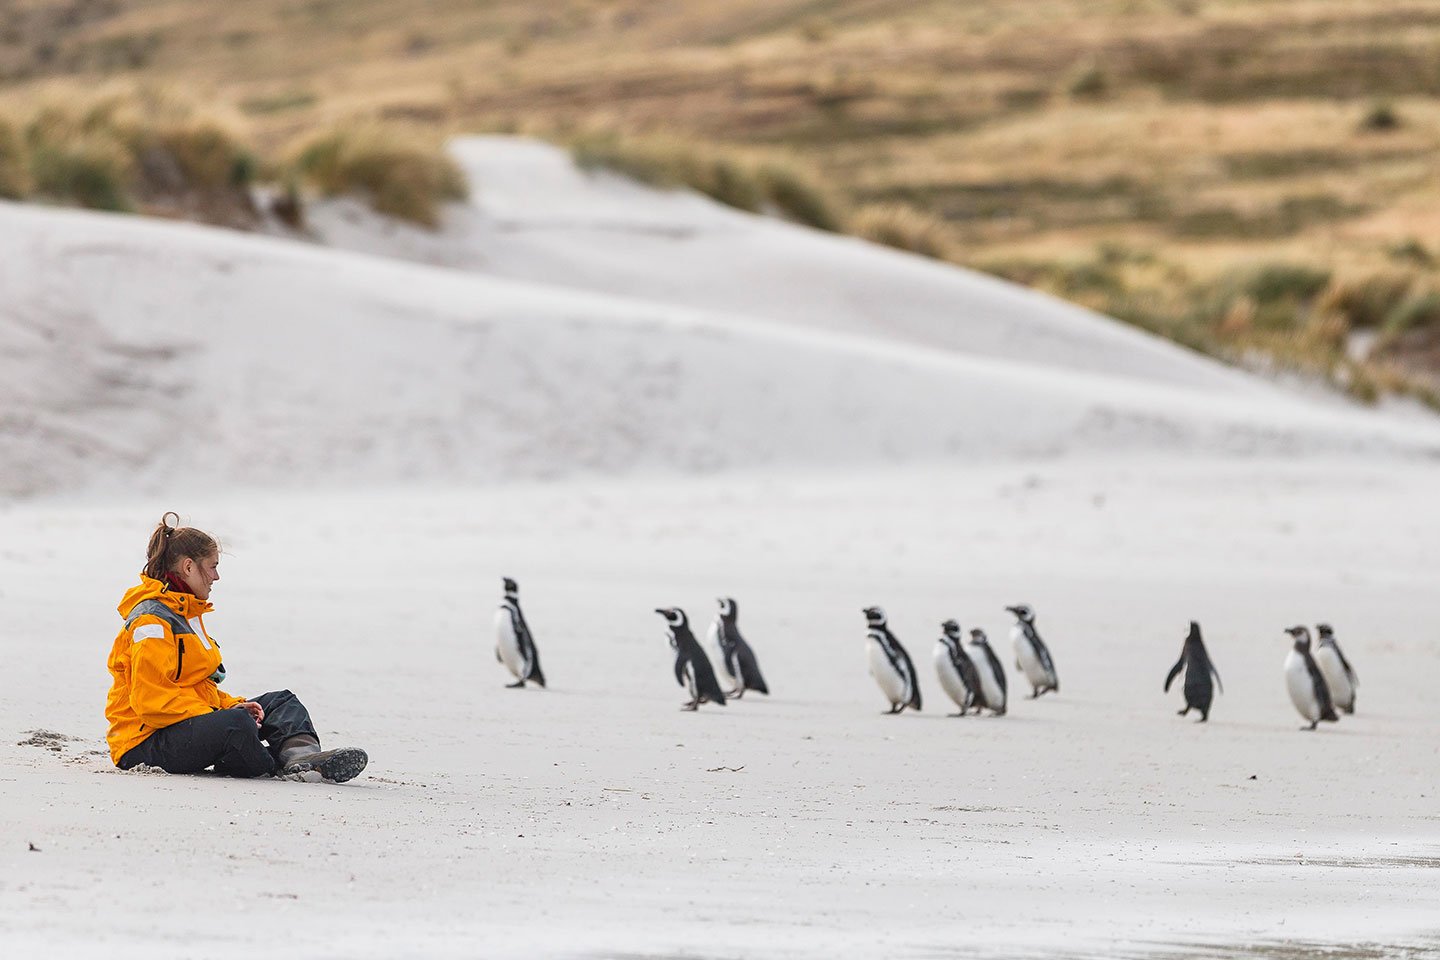 History and wildlife are the drawing cards of the Falkland Islands.